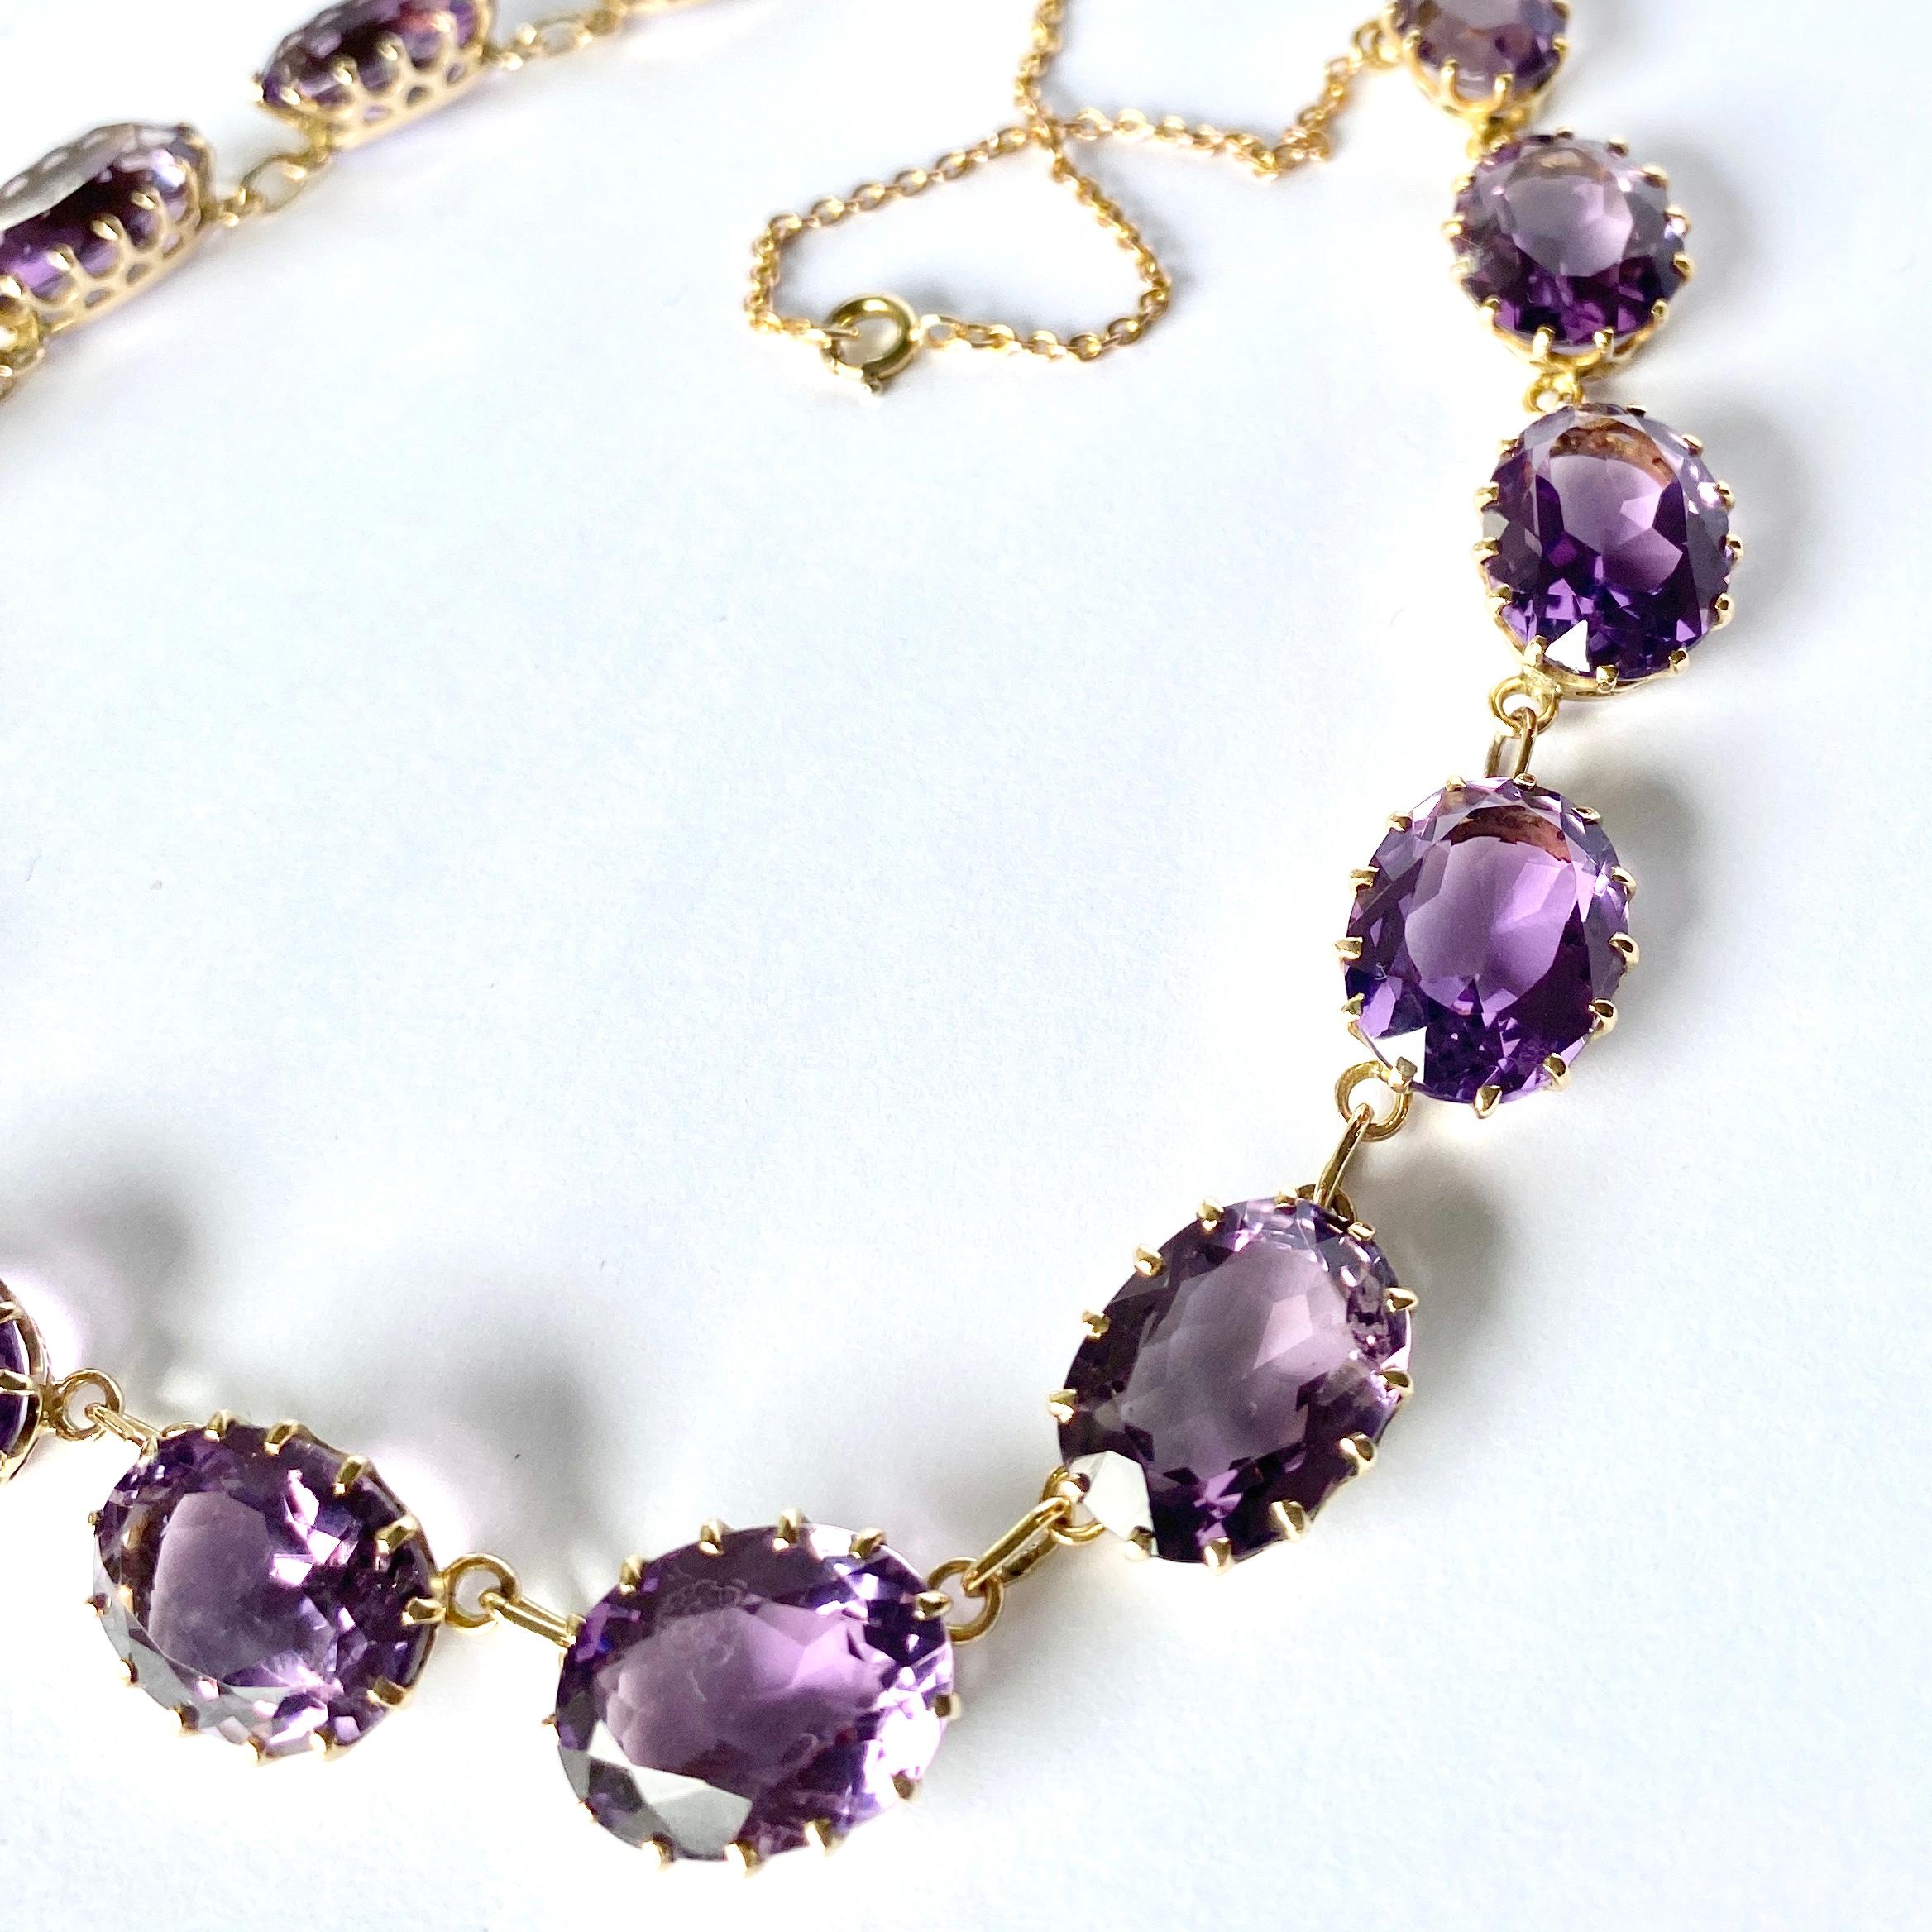 Fifteen stunning bright purple amethyst stones adorn this necklace. The 9ct gold chain is delicate compared to the chunky stones and is fastened using a bolt clasp.

Length: 45.5cm
Stone Dimensions: 8x13-19x14mm

Weight: 39.4g